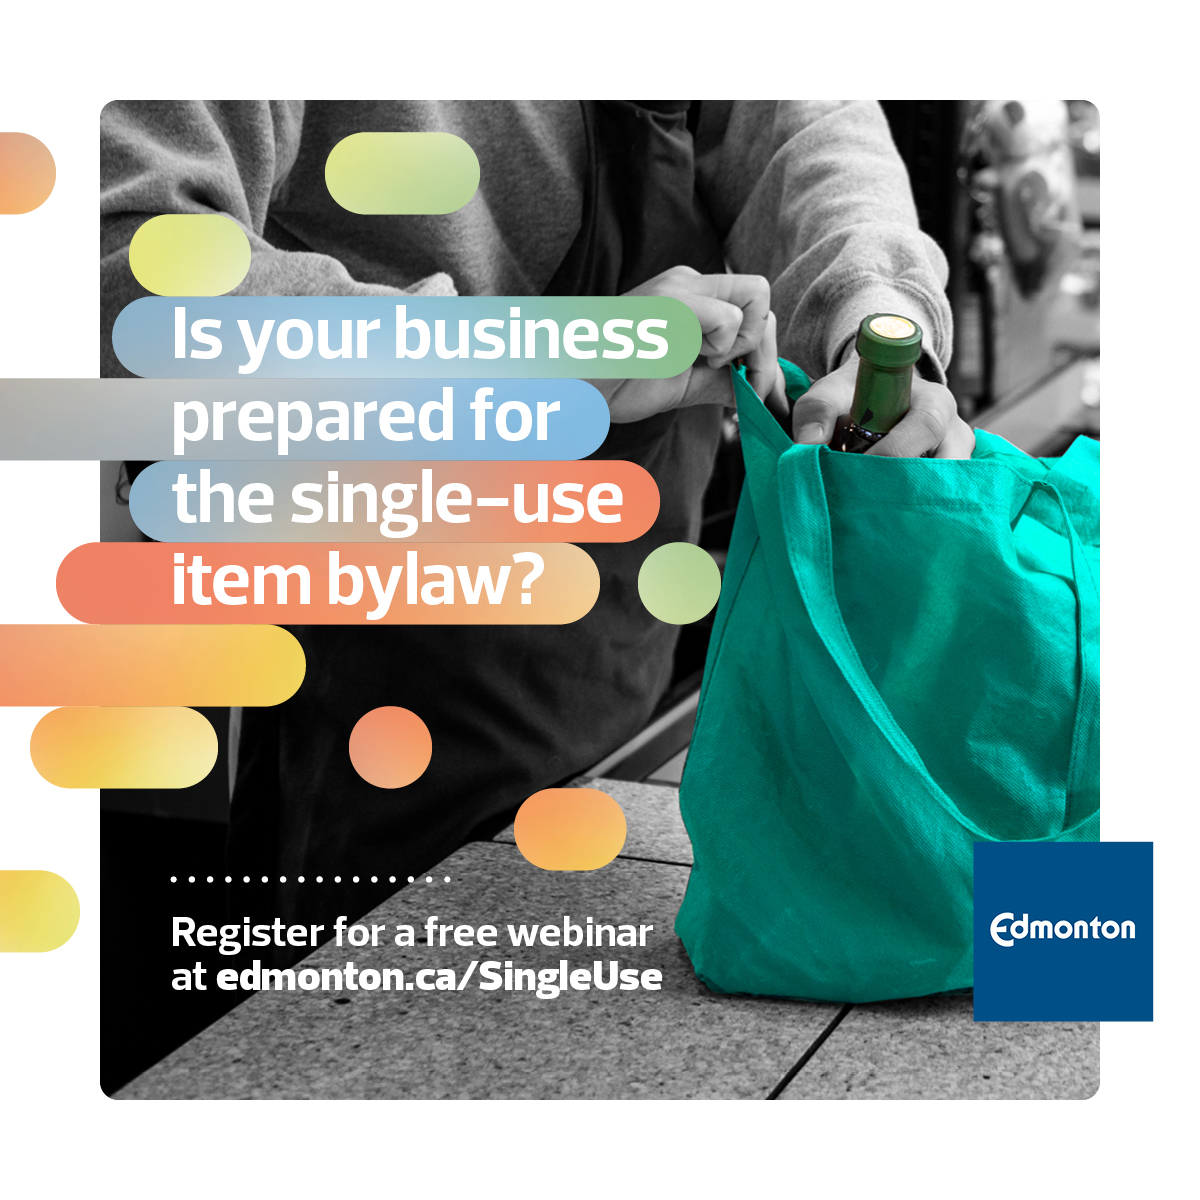 Did you know that as of July 1, your business cannot provide accessories like utensils, straws and condiments, unless a customer requests them? Join us on May 2 or May 10 for a free webinar to help prepare your business. Register at edmonton.ca/SingleUse